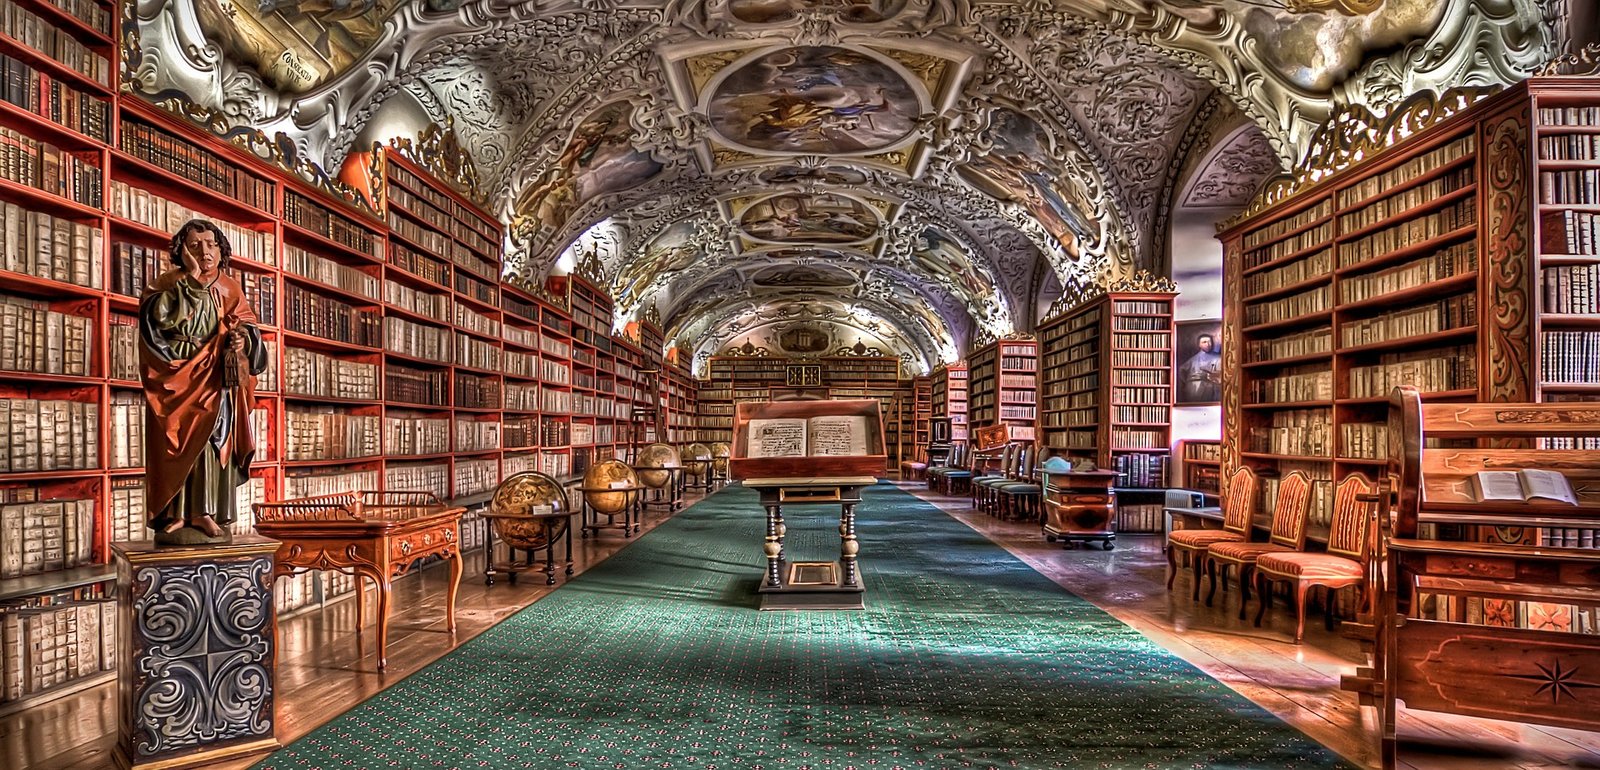 The Prague Library